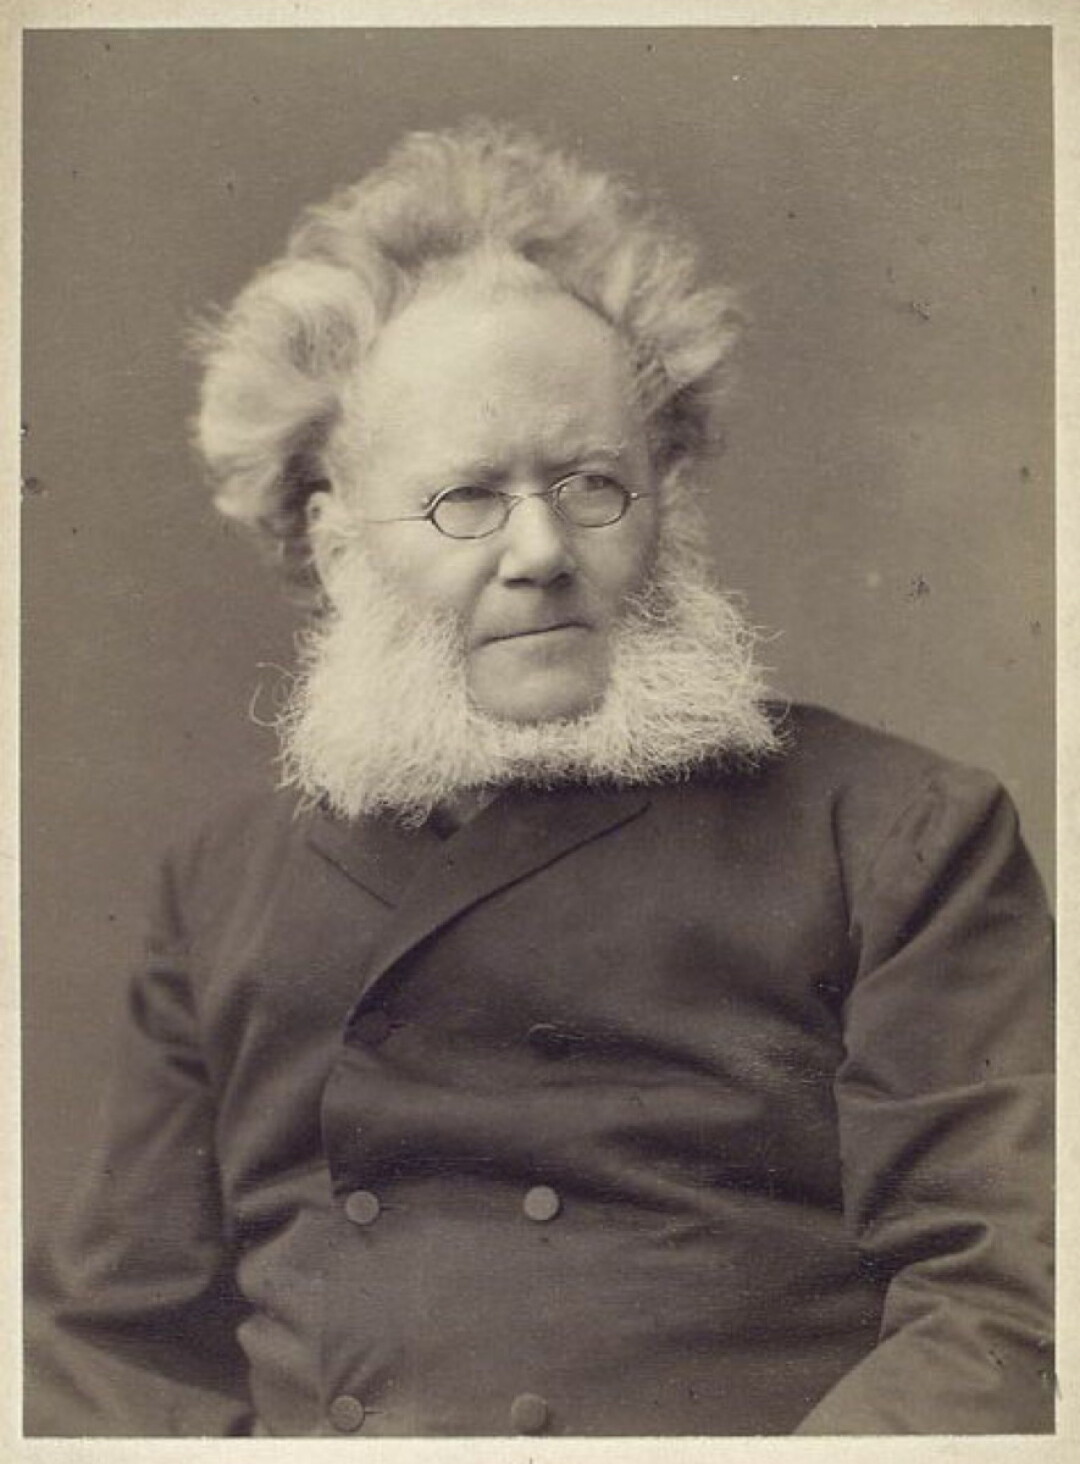 Ibsen, Explained - Norwegian playwright the focus of